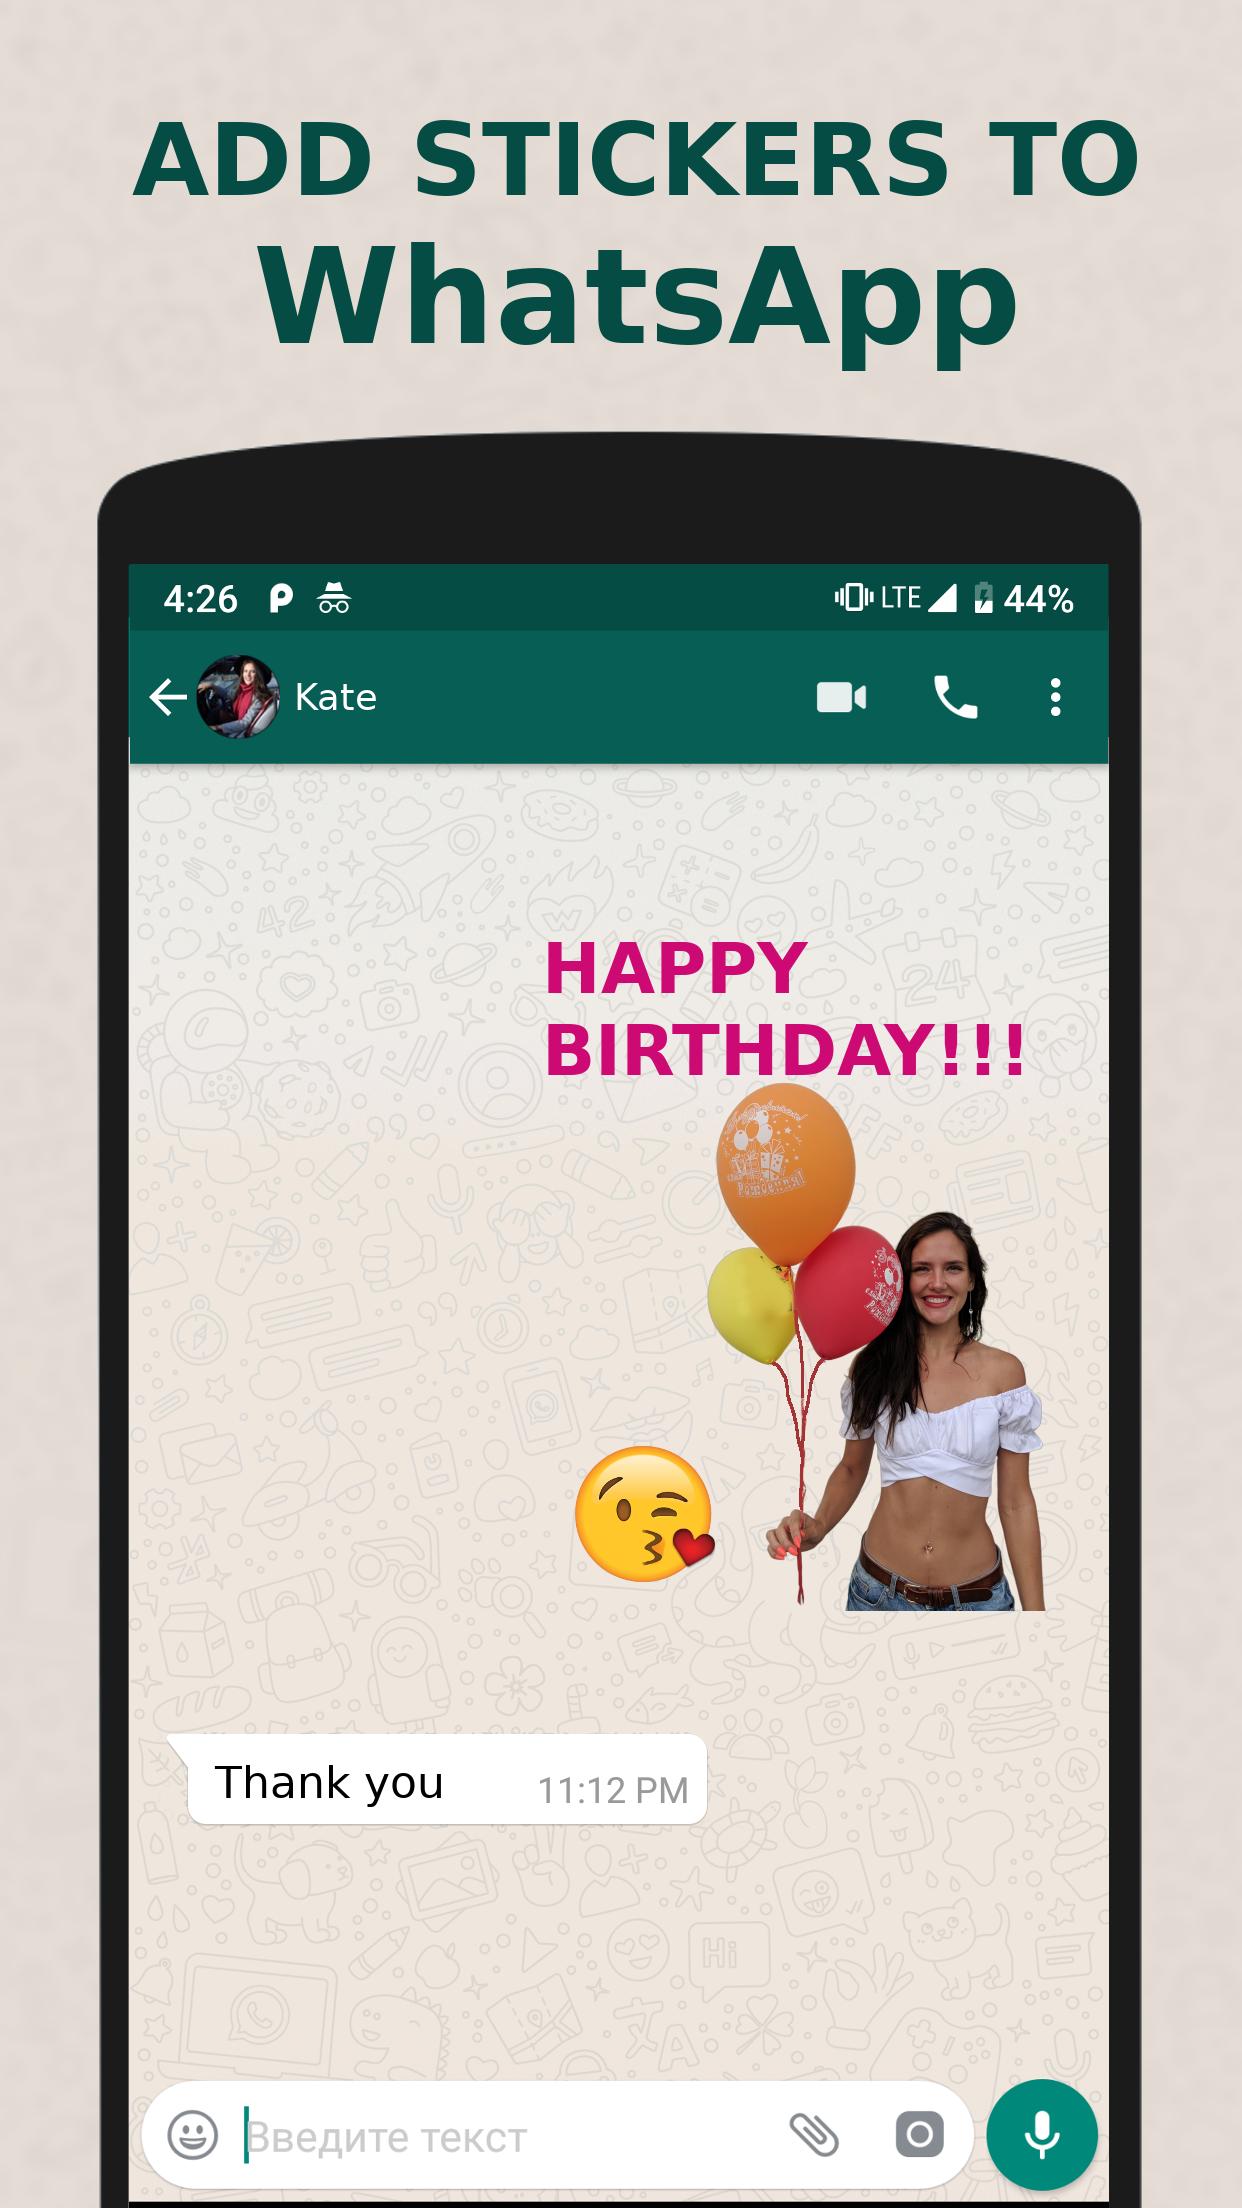 Sticker Maker for WhatsApp for Android - APK Download